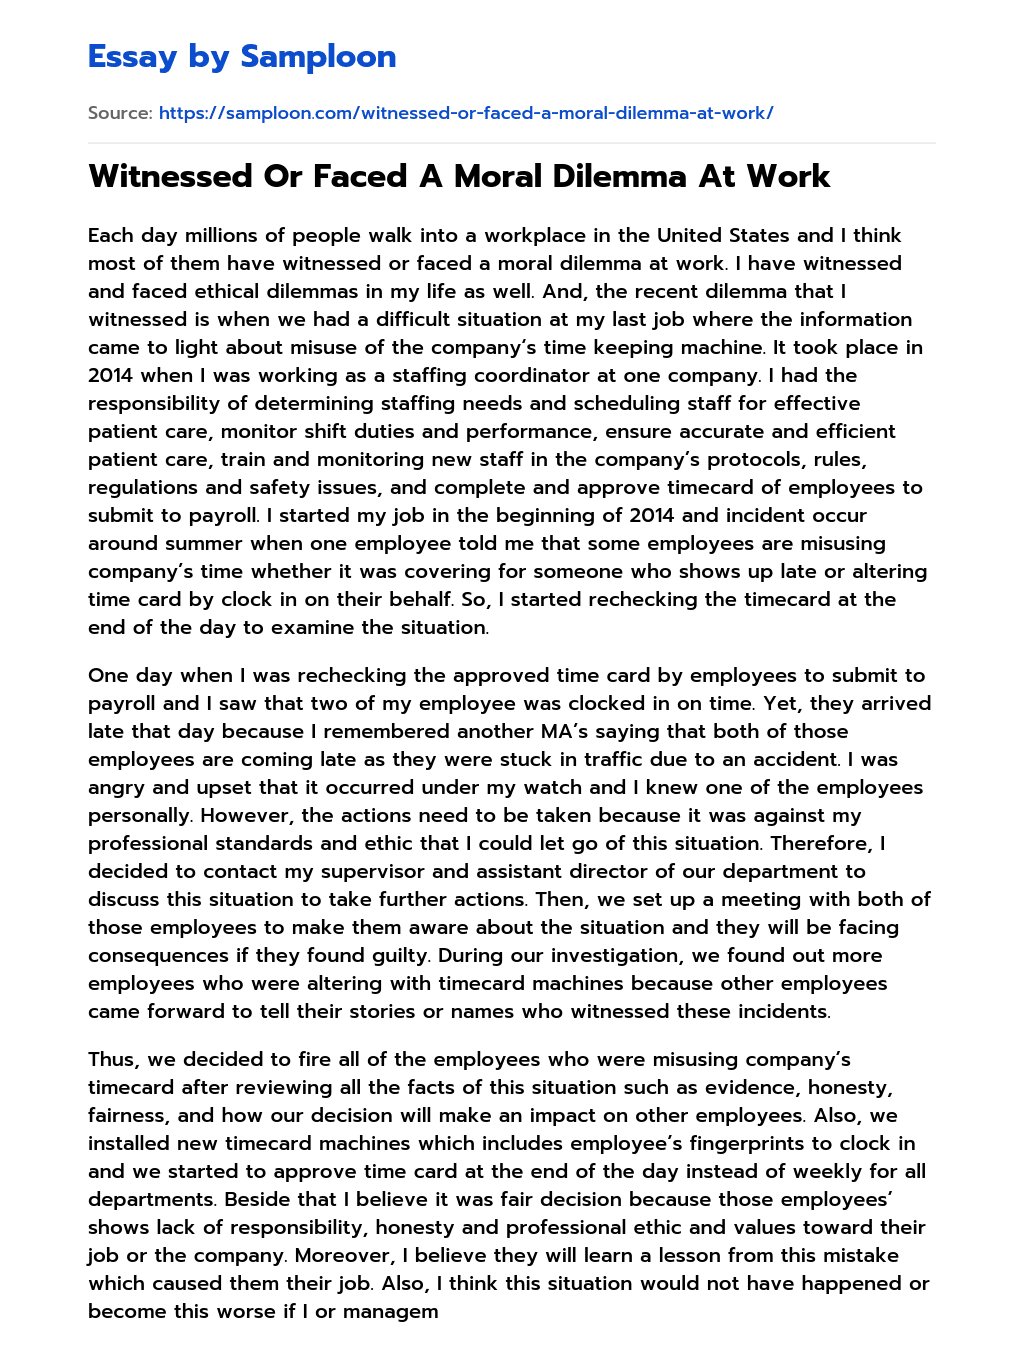 Witnessed Or Faced A Moral Dilemma At Work essay